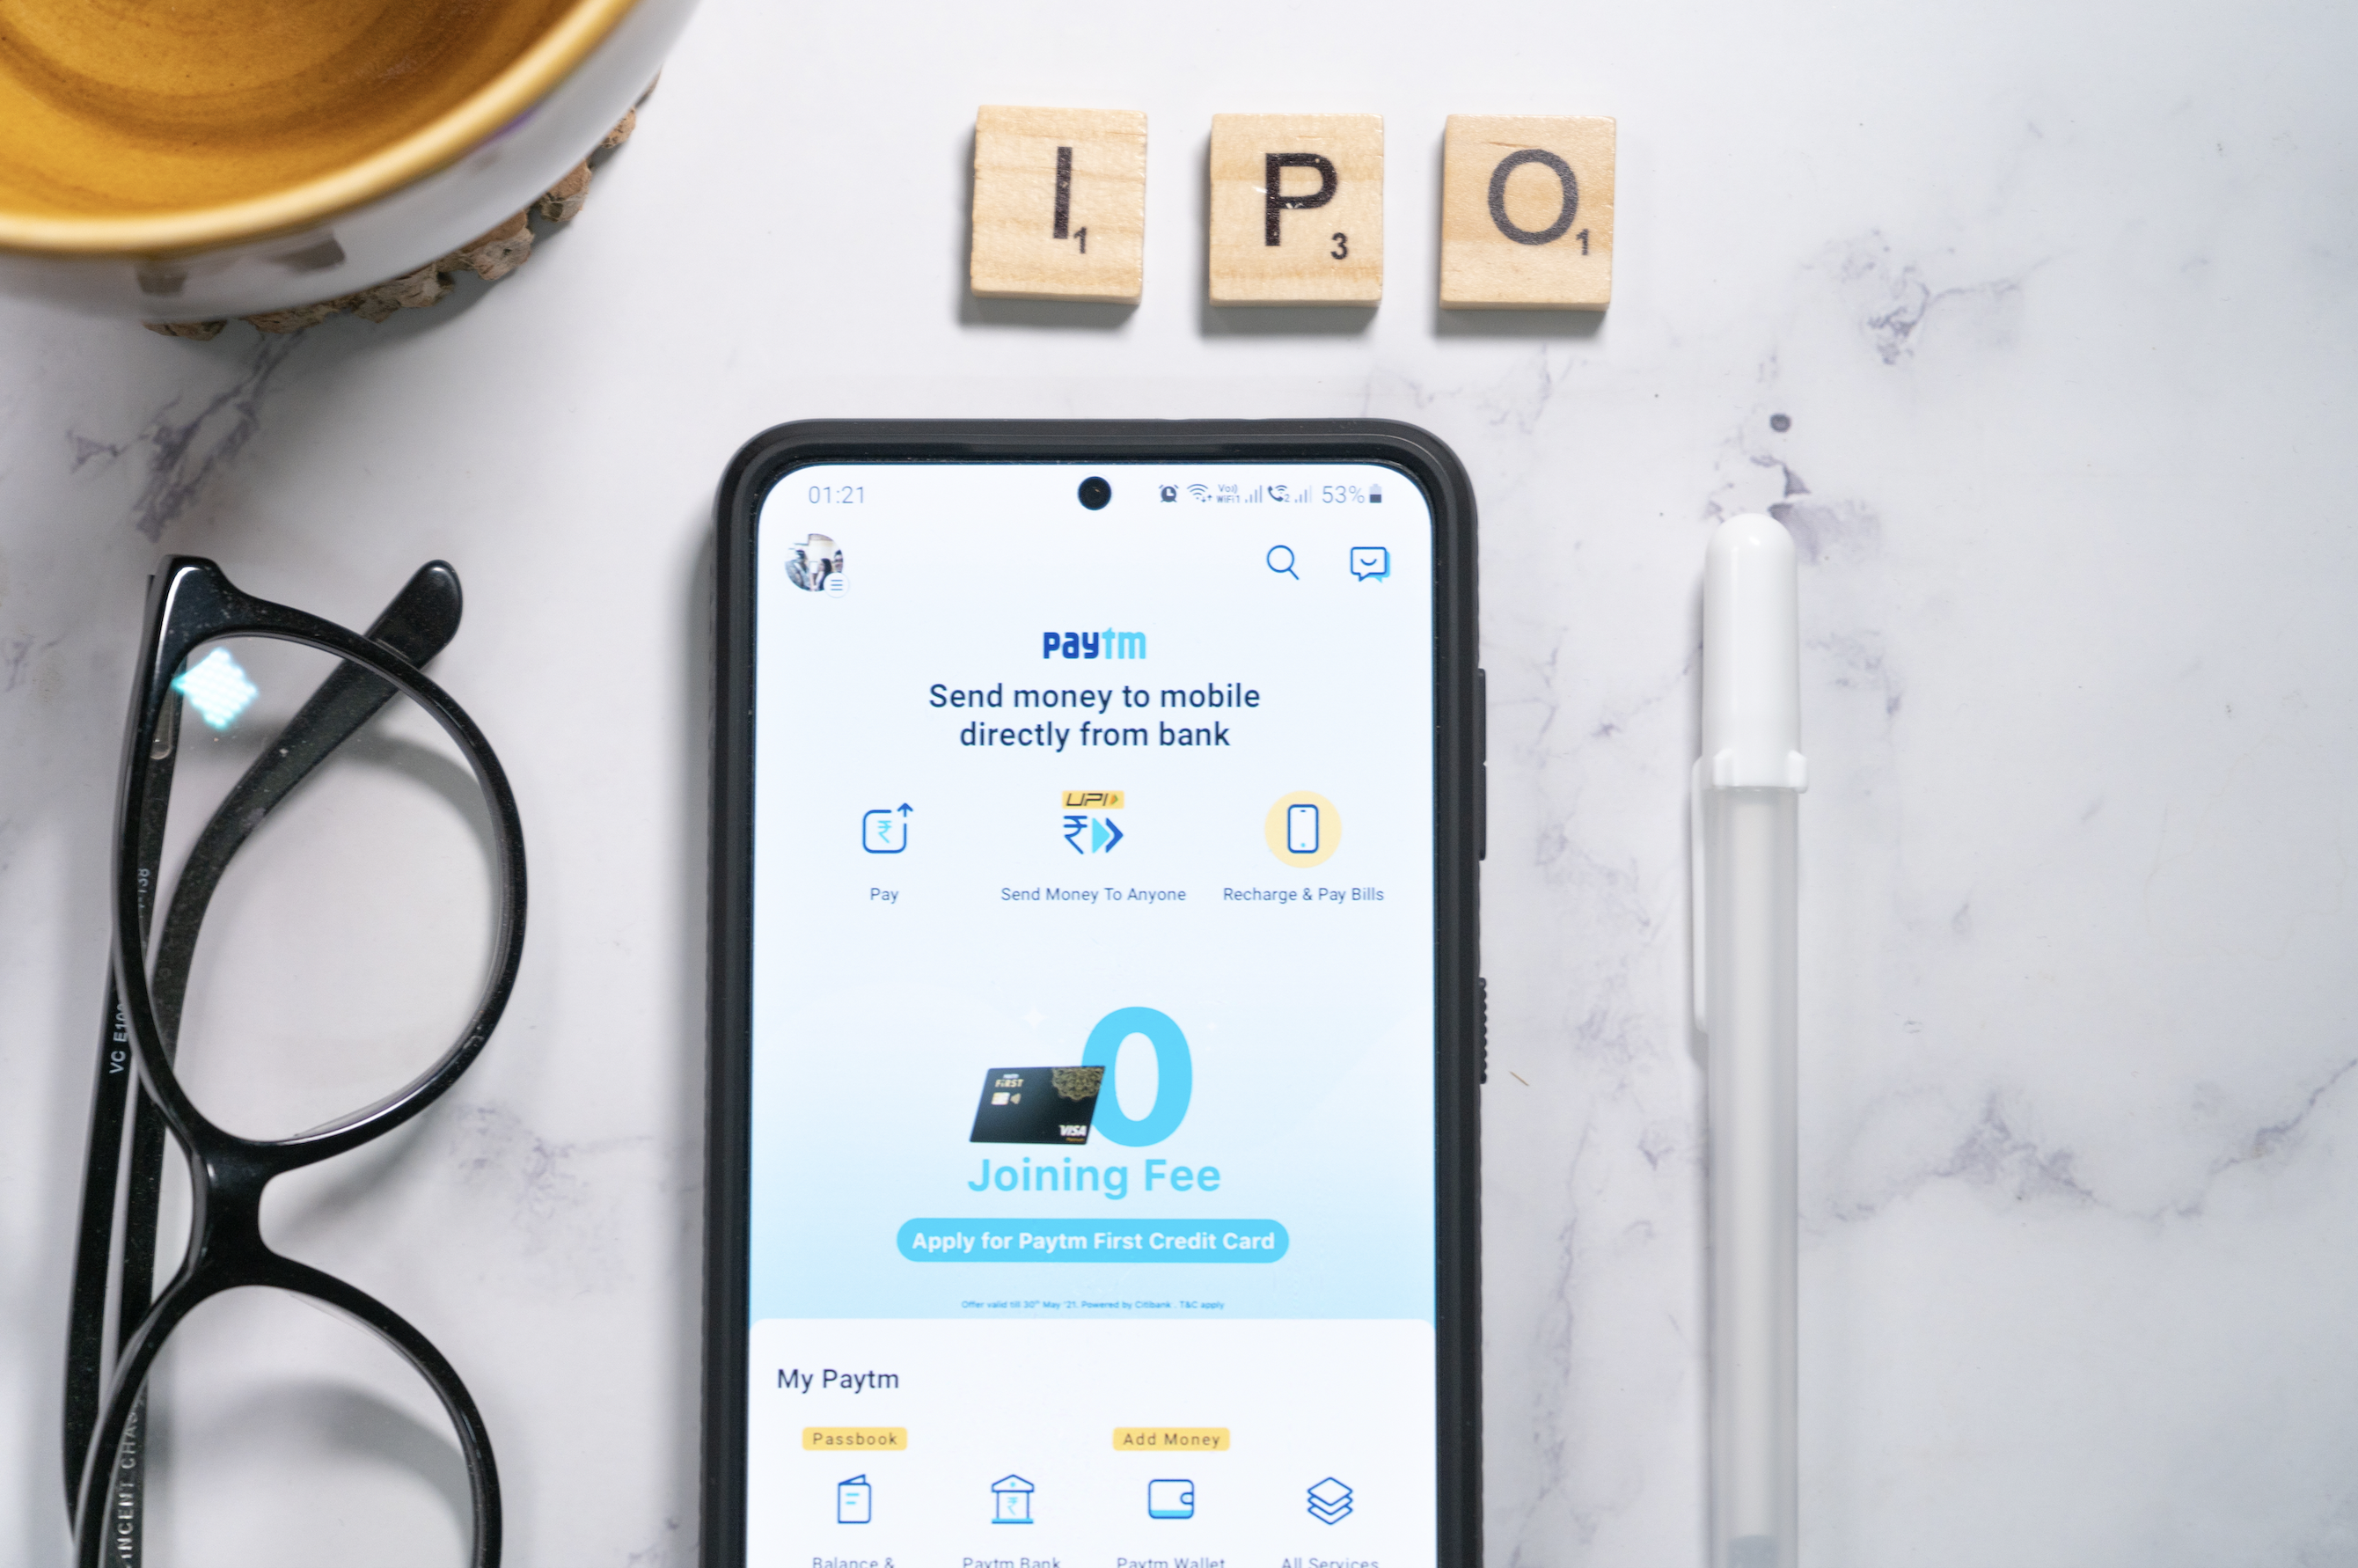 Paytm’s USD 2.47 billion IPO sees lackluster demand on day one